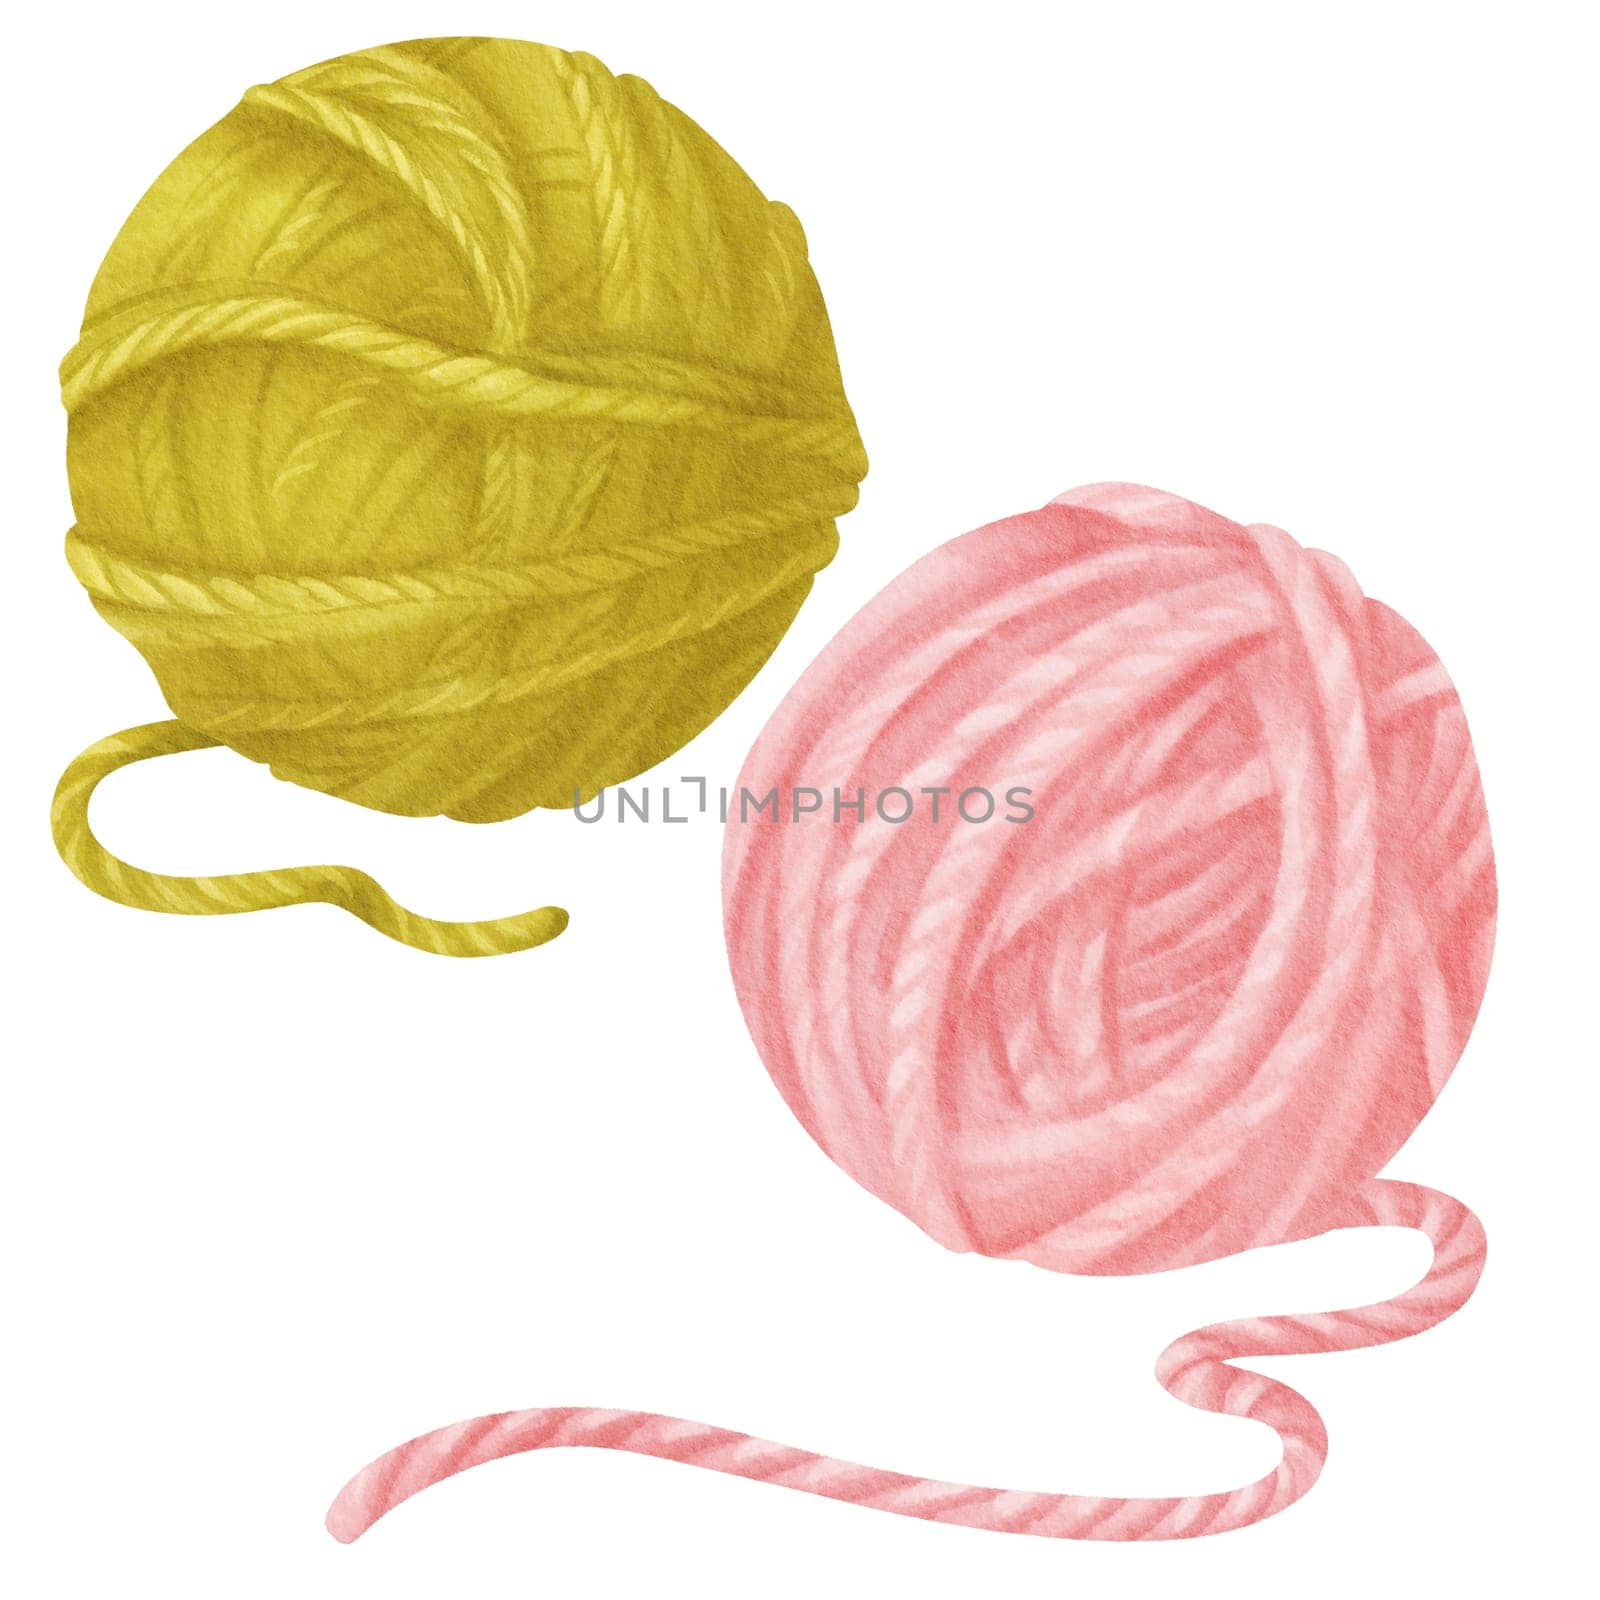 Set of isolated watercolor depiction of a pink and green yarn spool. Comprised of wool and cotton strands. for hobbyists, sewing boutiques, fabric and educational resources for knitting and sewing.